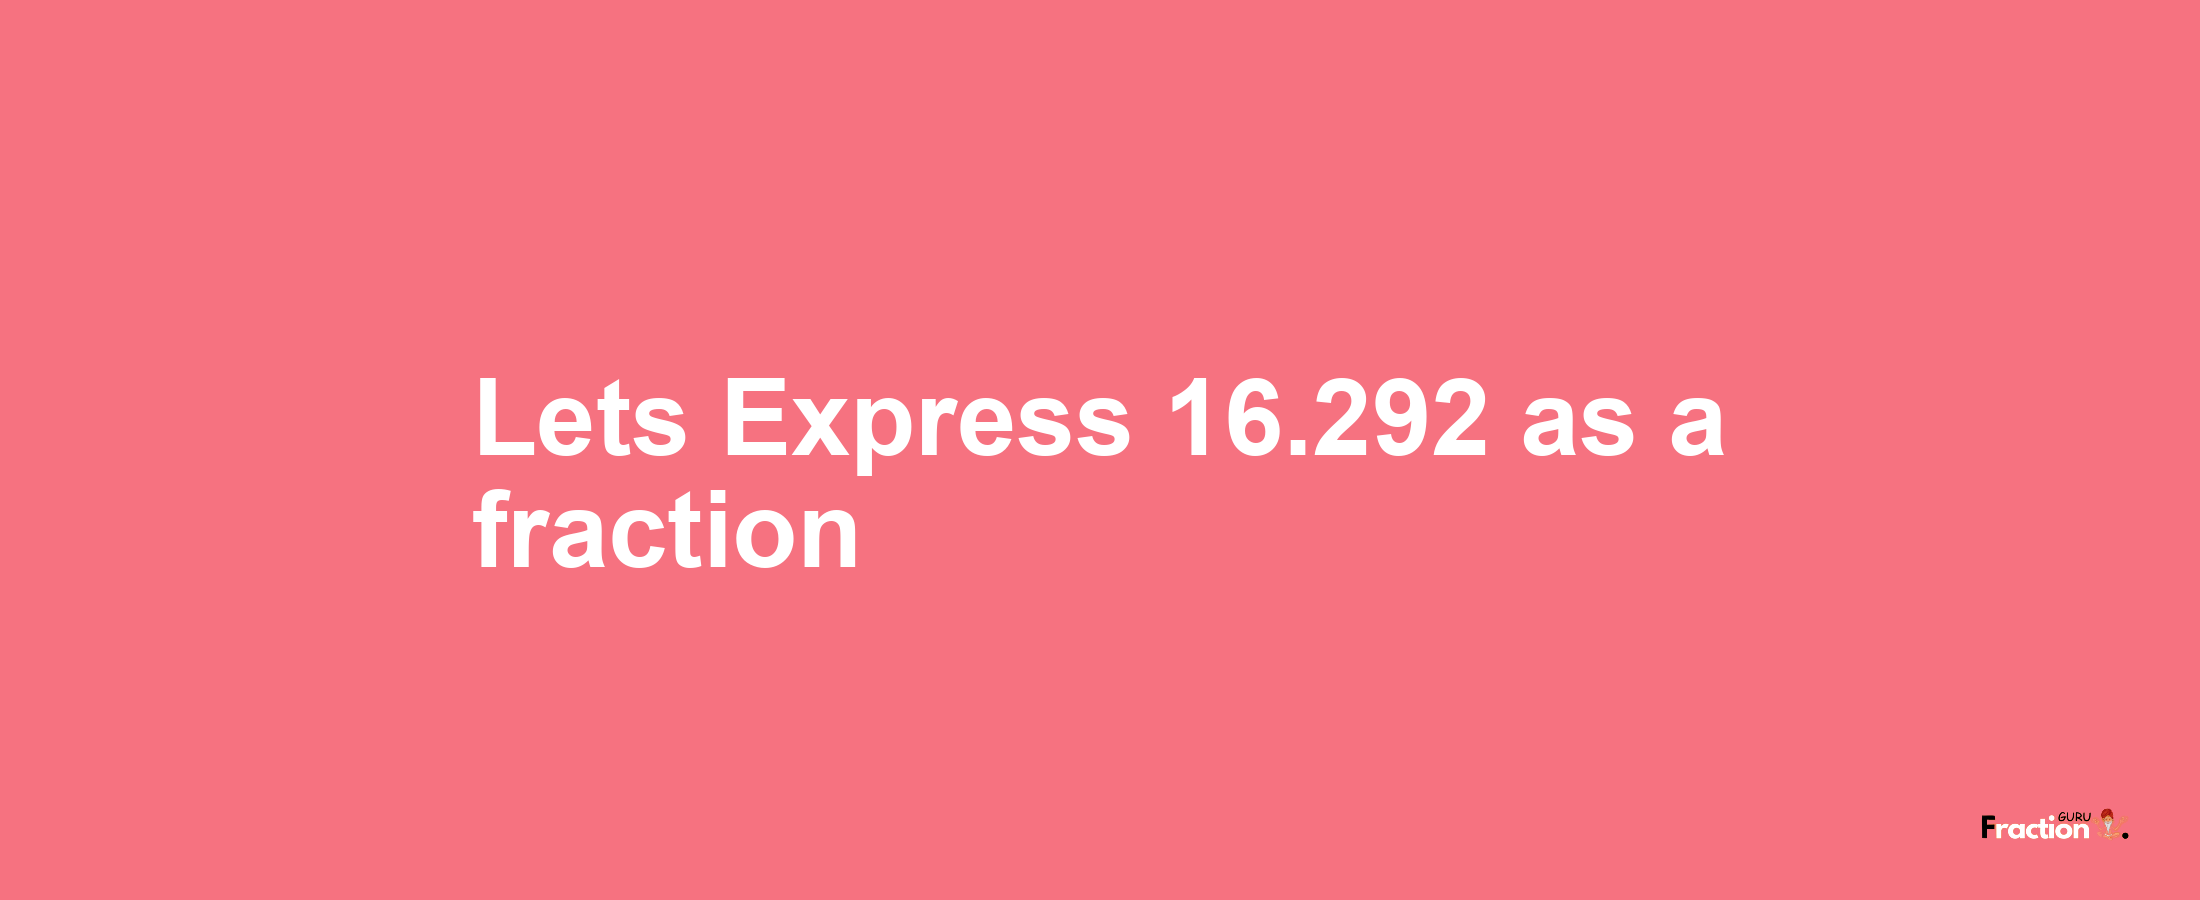 Lets Express 16.292 as afraction